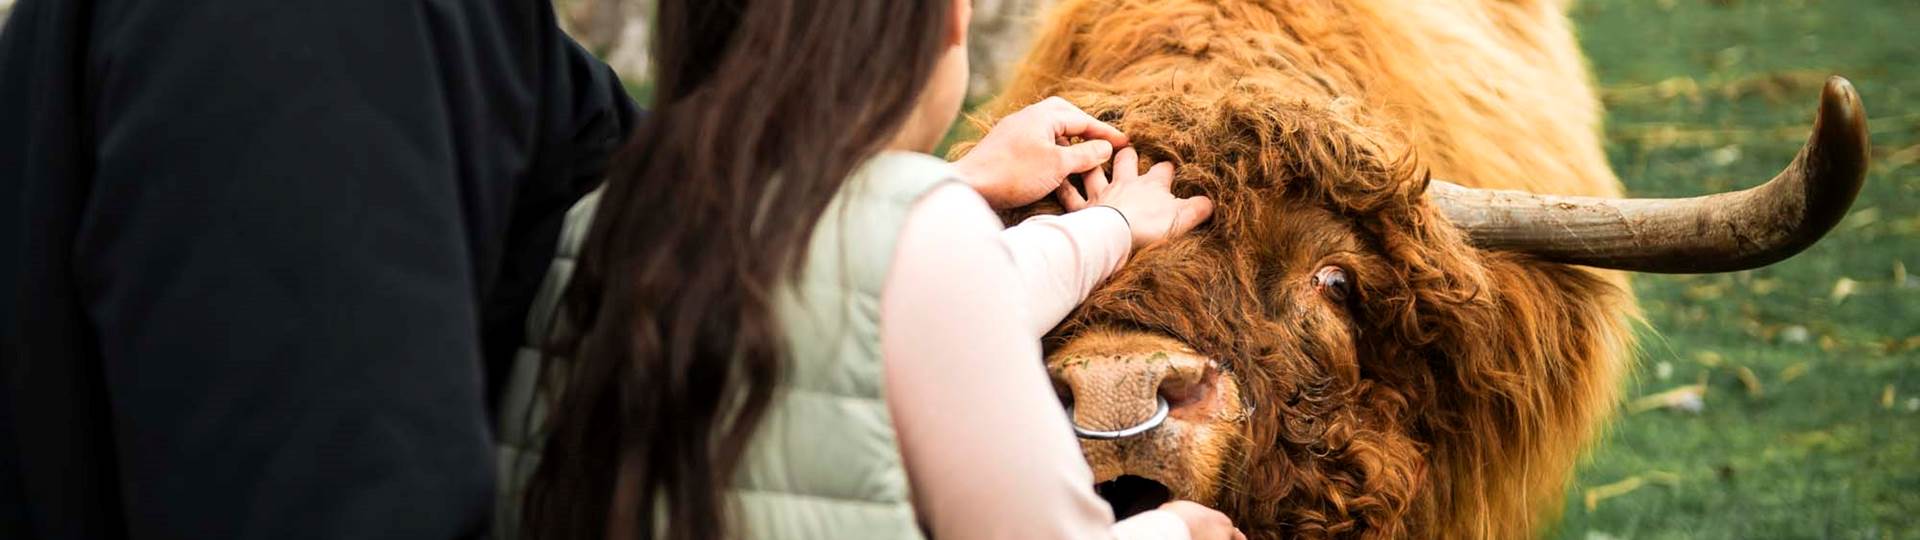 Two people stroking a Highland Cow at Walter Peak